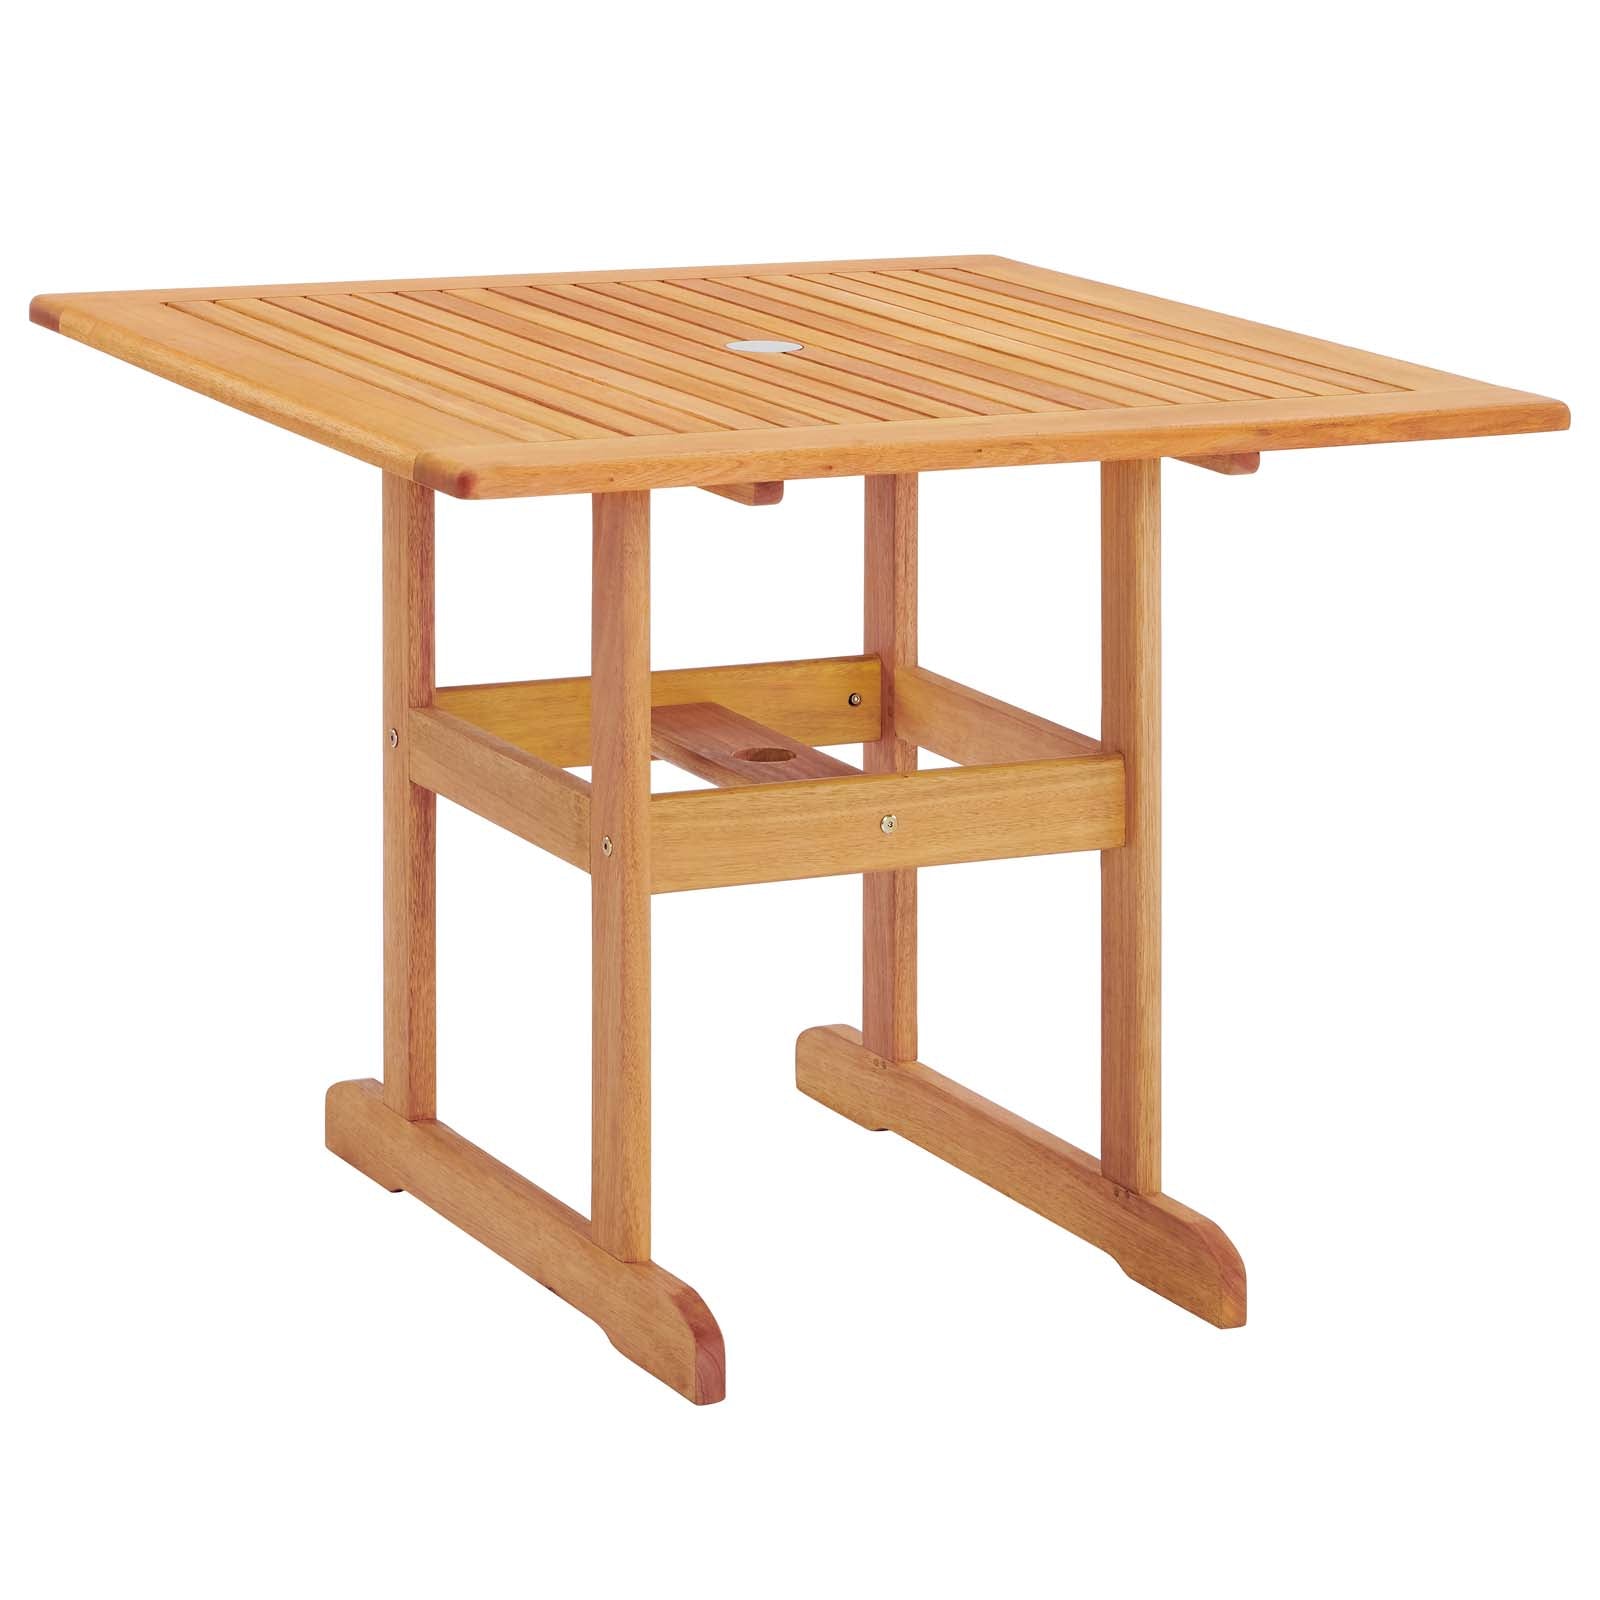 Modway Outdoor Dining Tables - Hatteras 36" Square Outdoor Patio Eucalyptus Wood Dining Table Natural